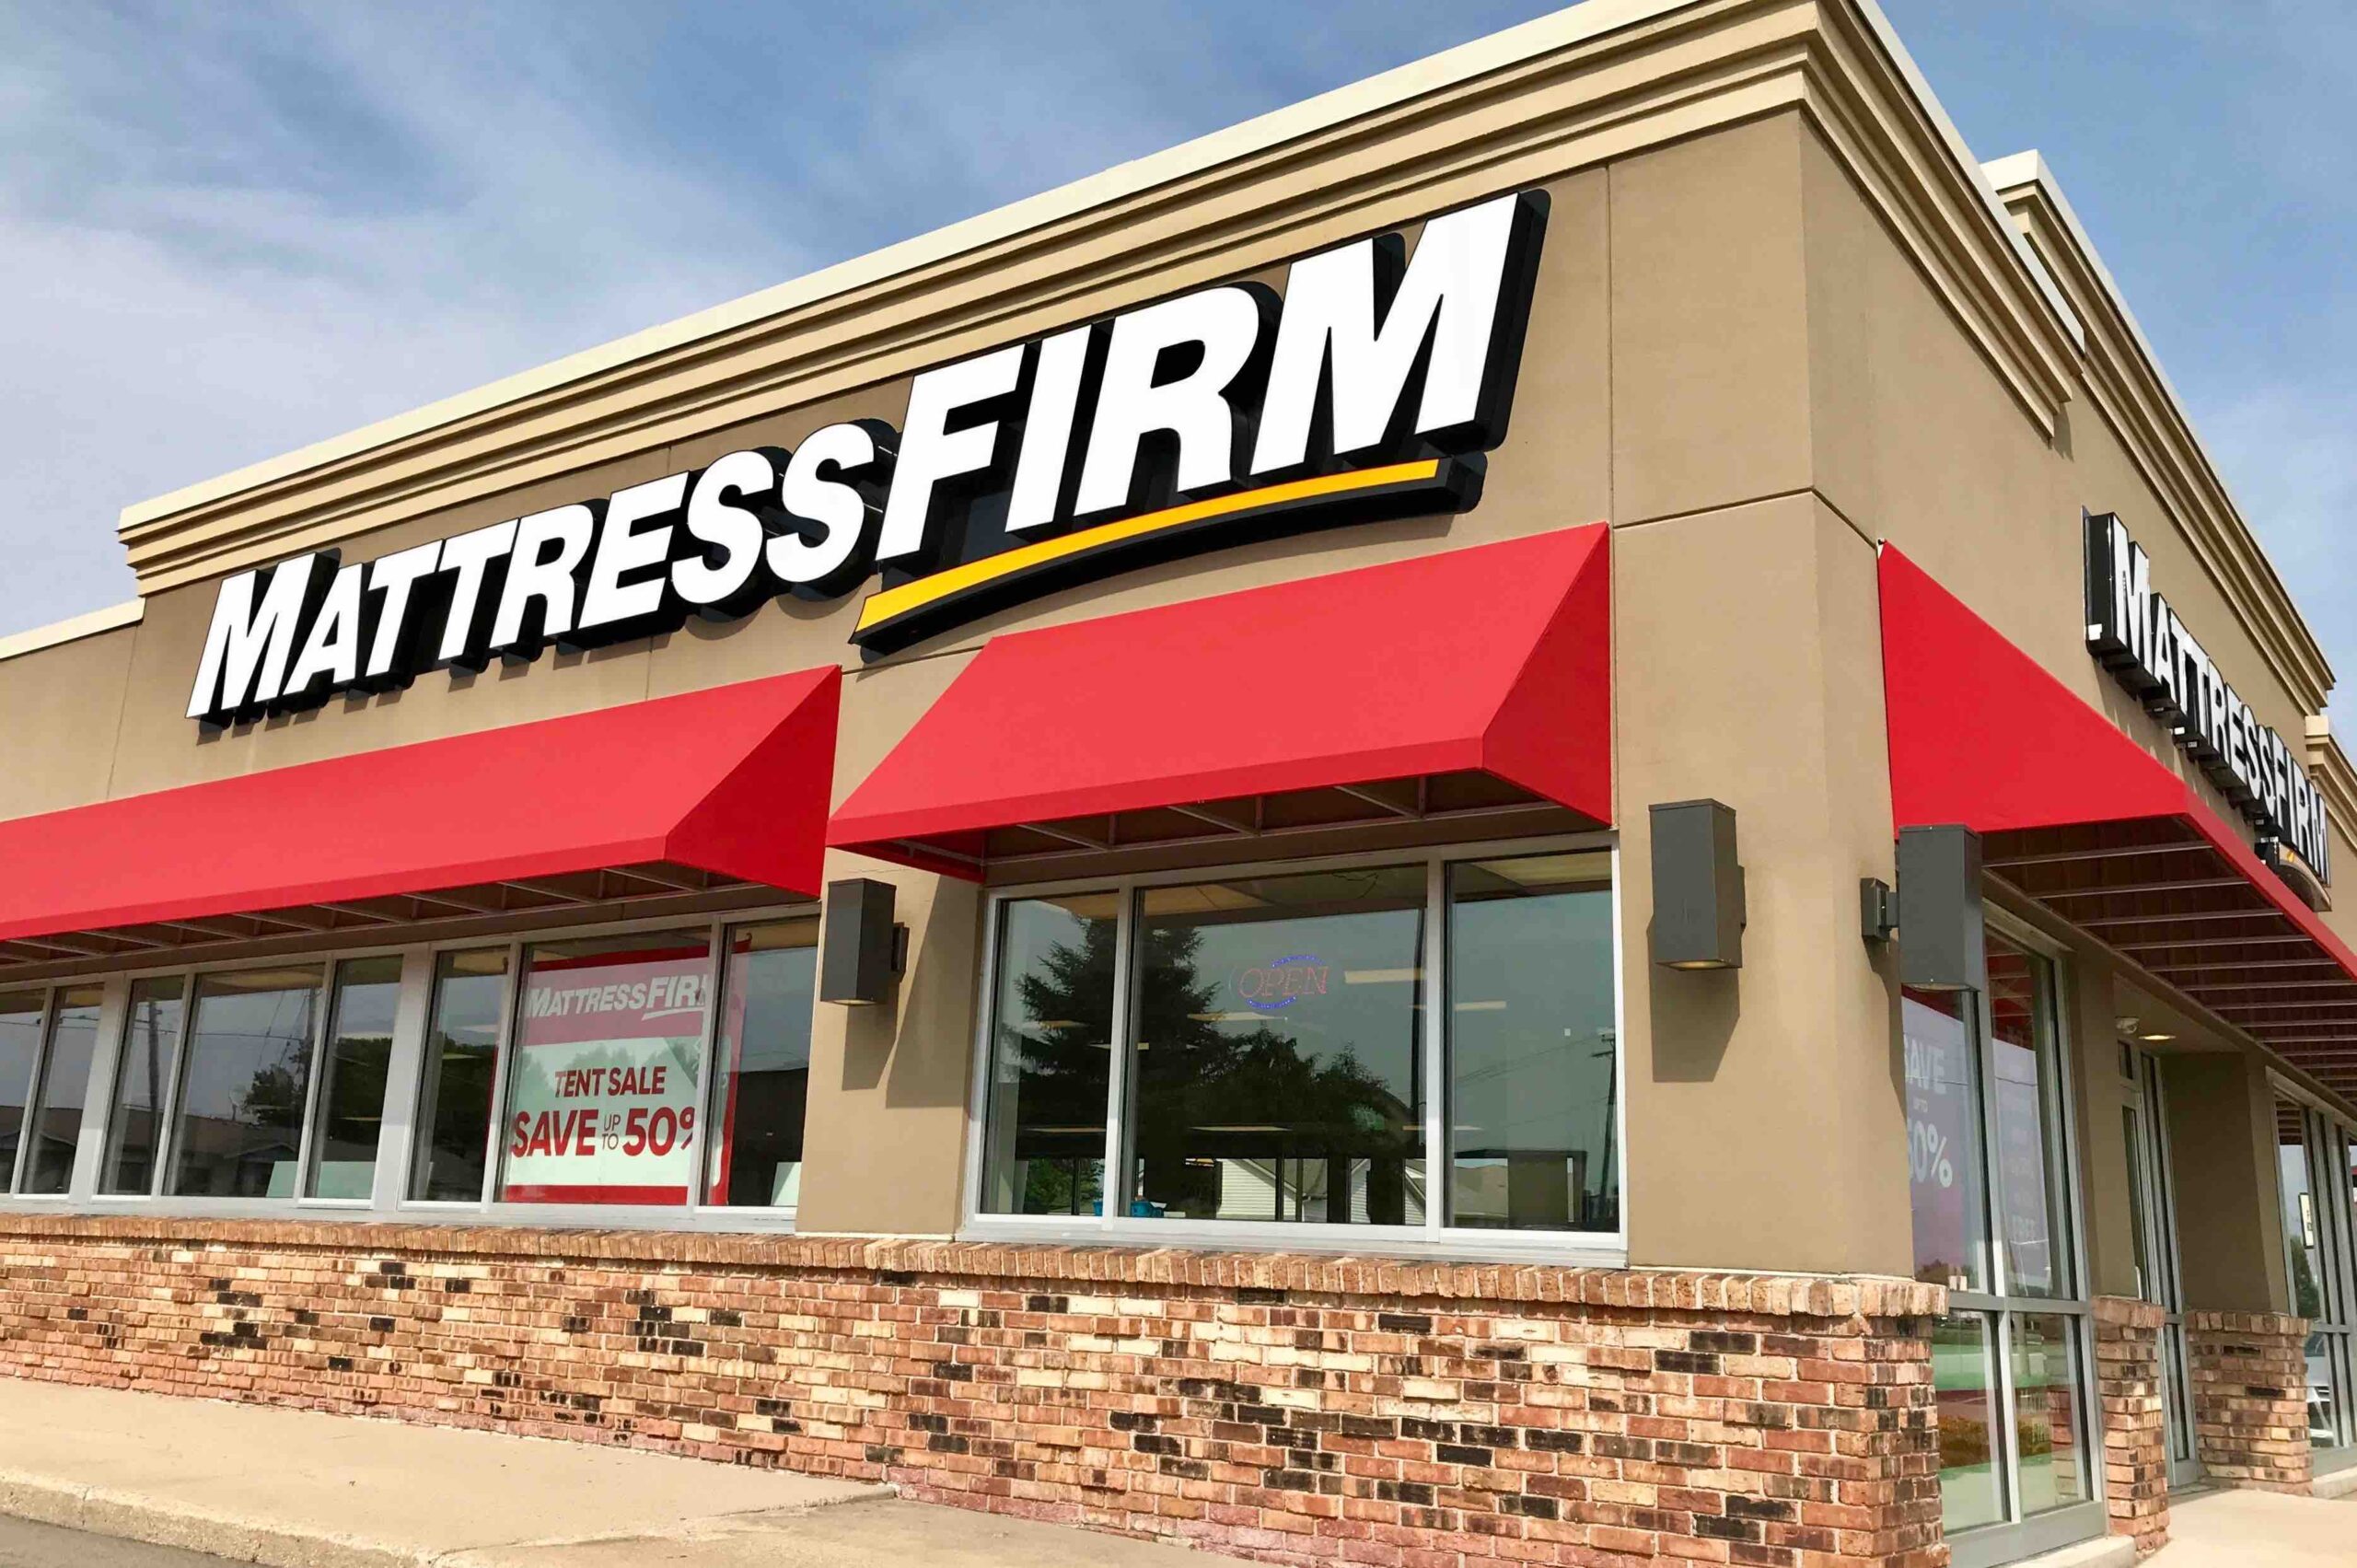 tempur sealy and mattress firm